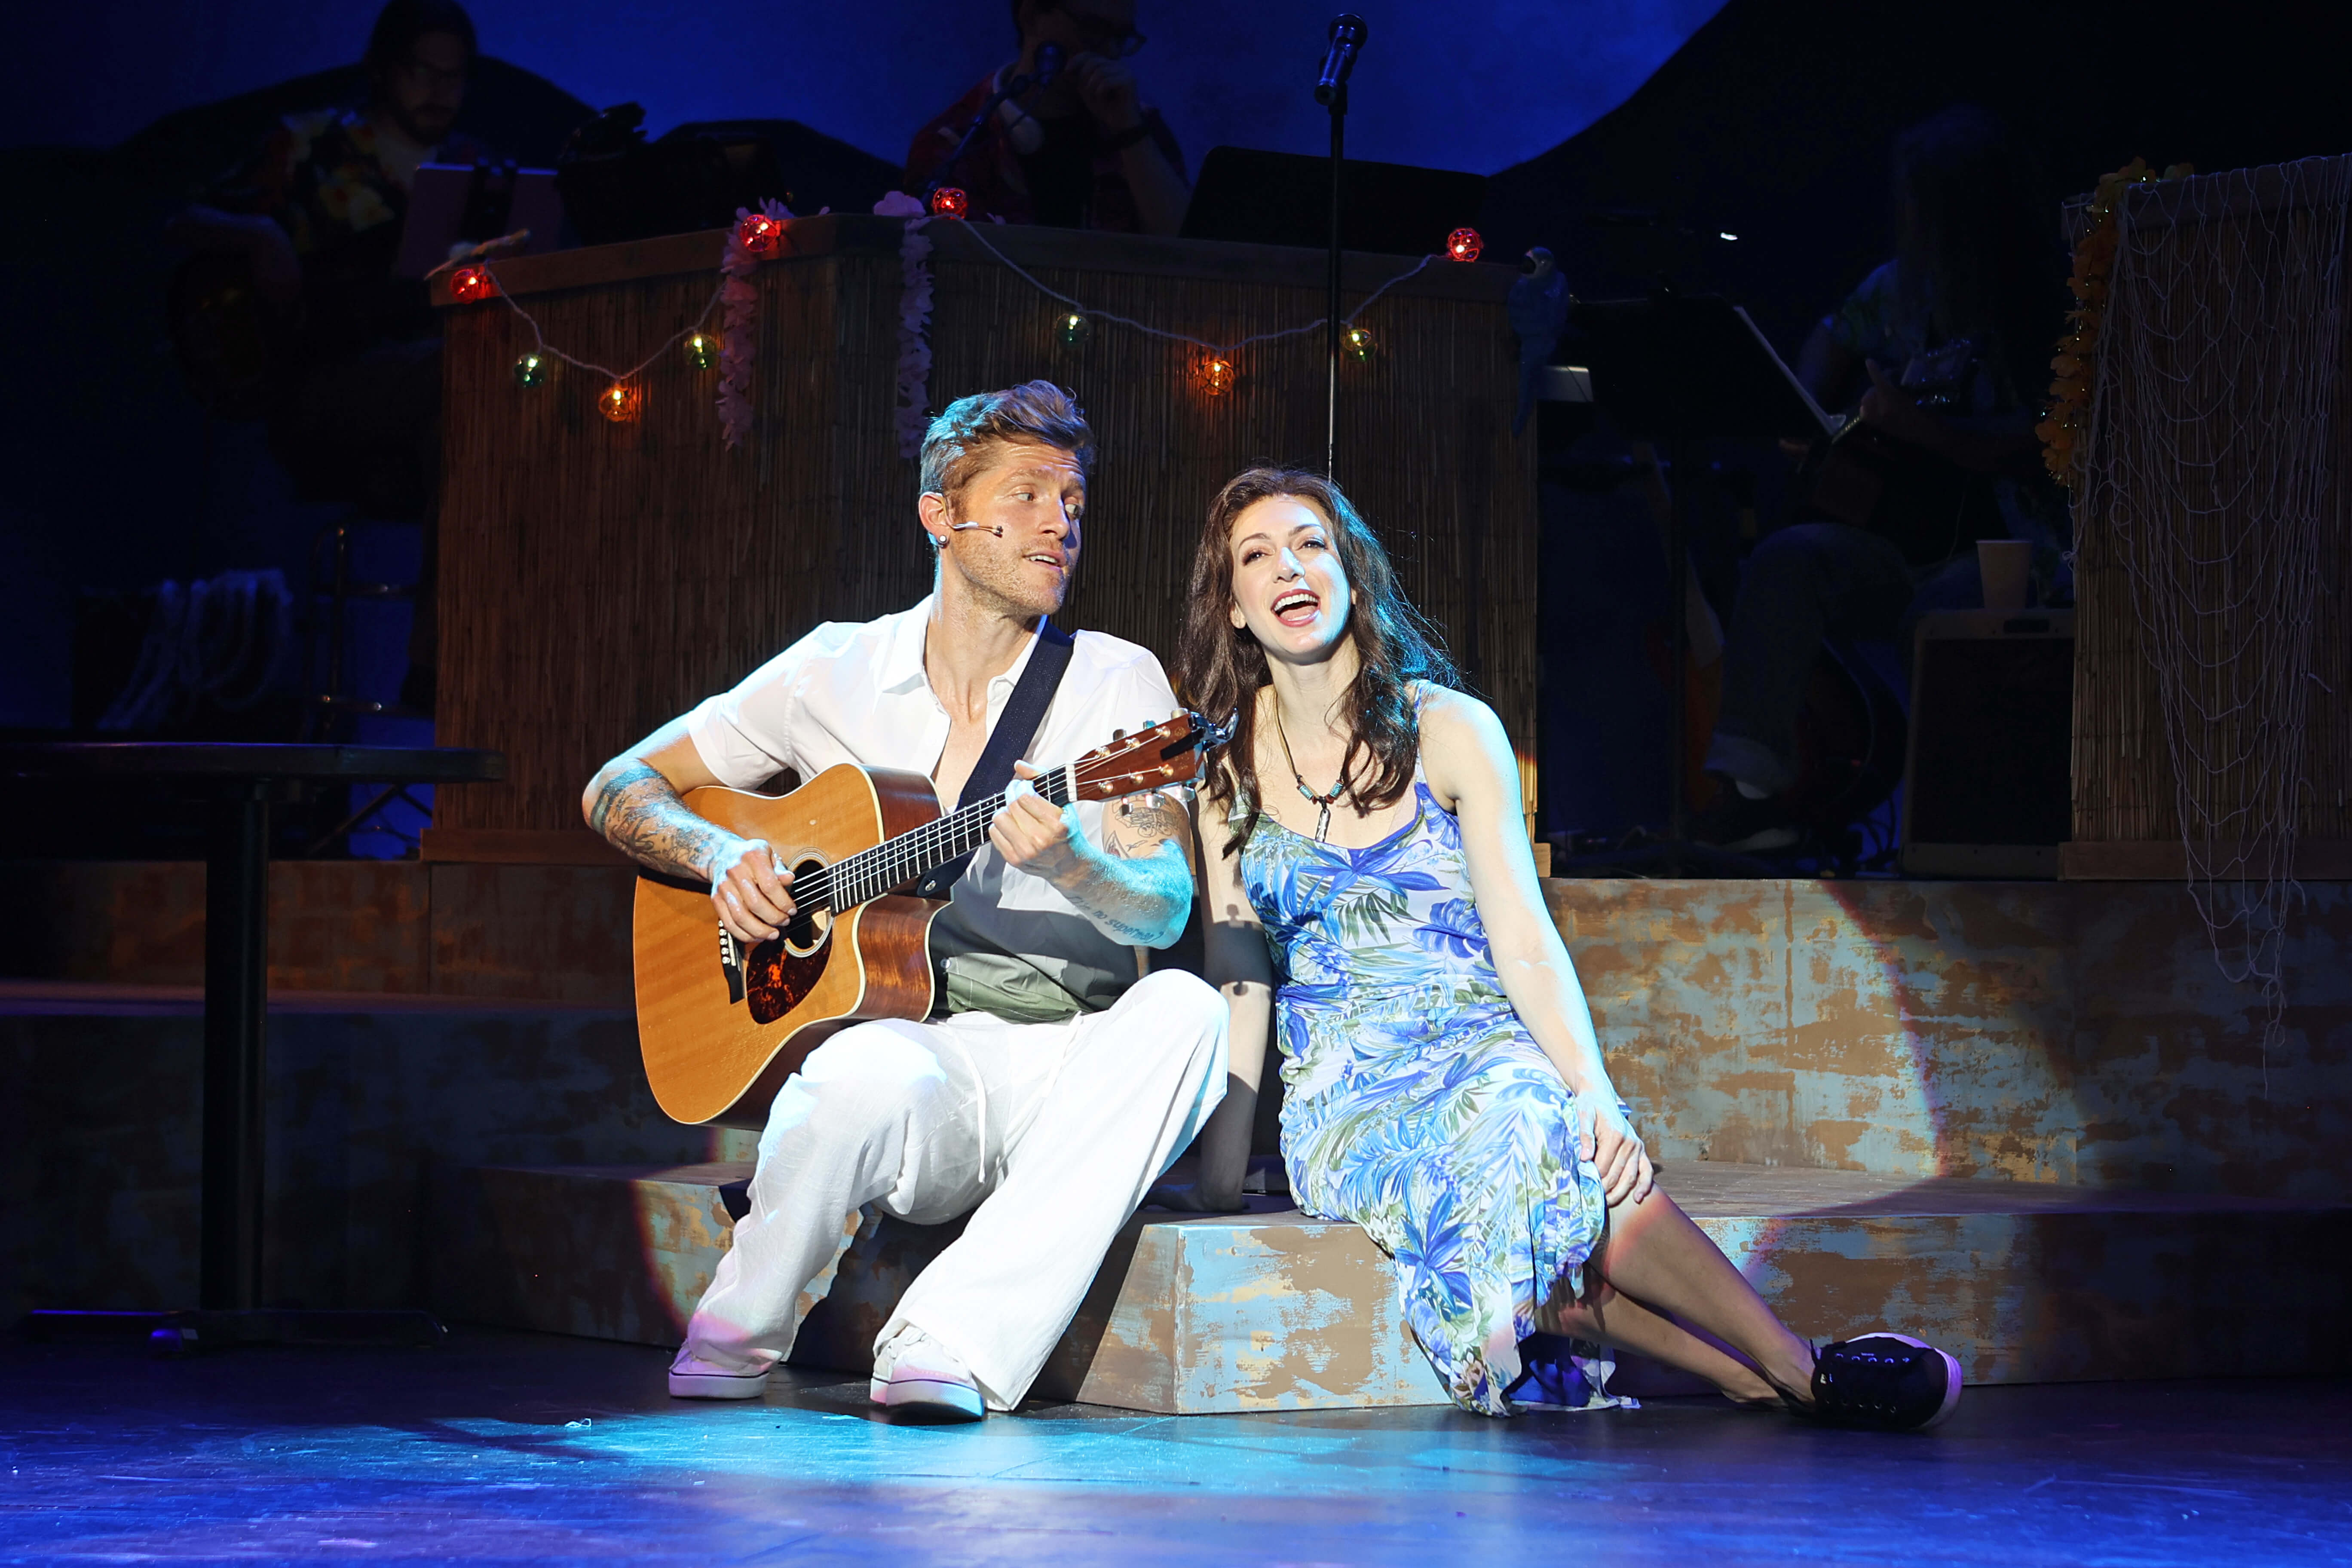 Cody Craven as Tully and Sarah Ellis as Rachel in "Escape from Margaritaville" at The Gateway Playhouse